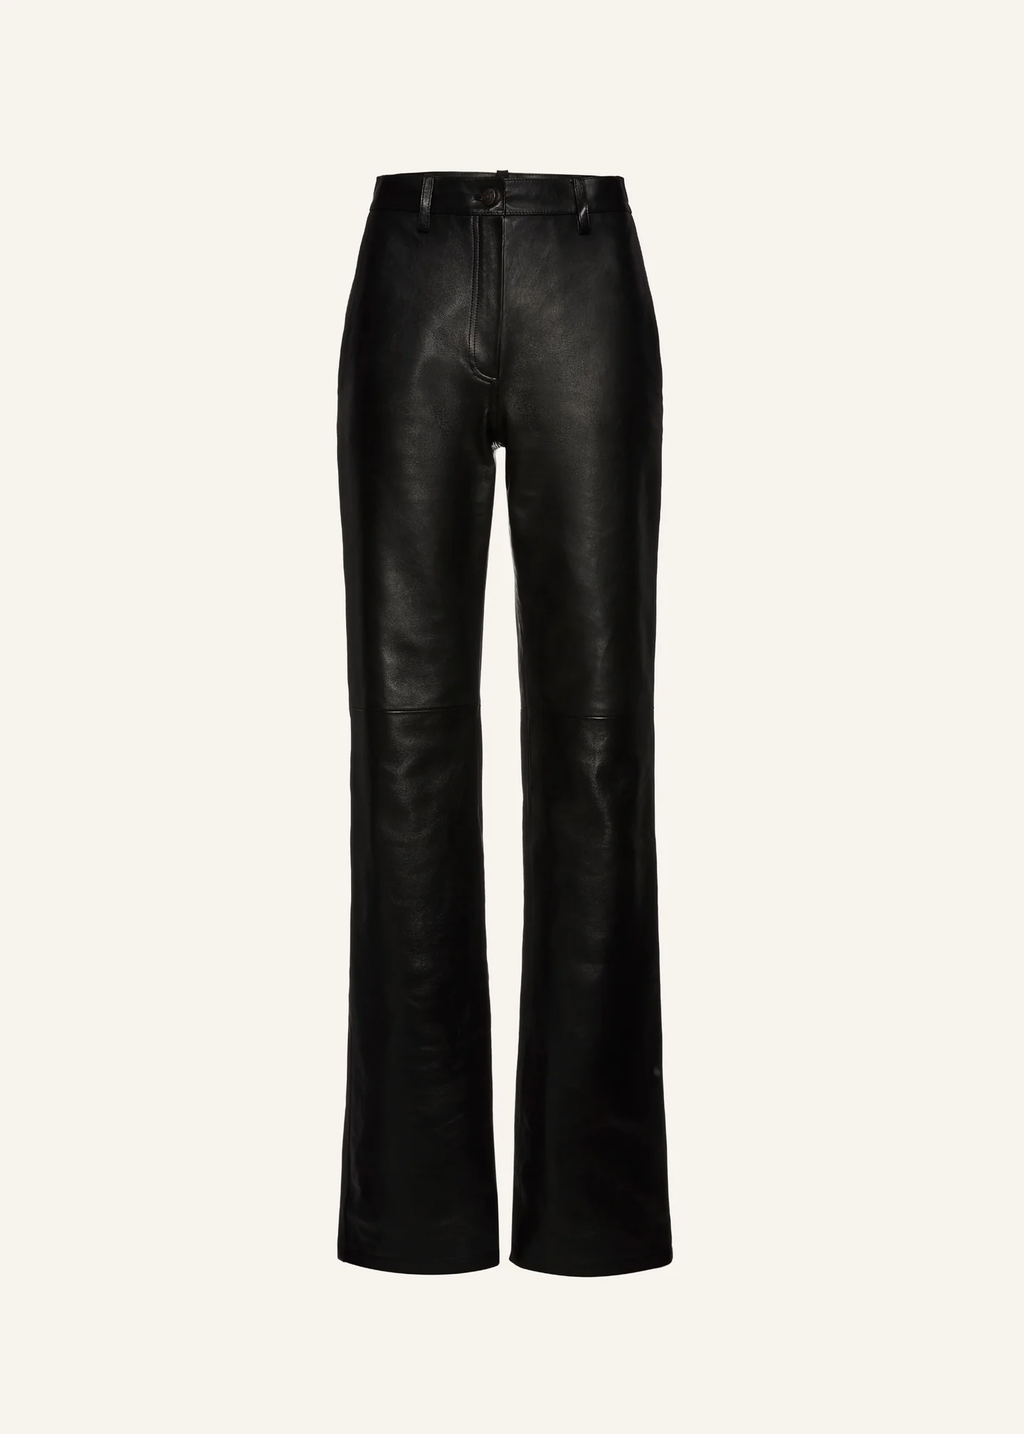 Flared Leather Black Pants